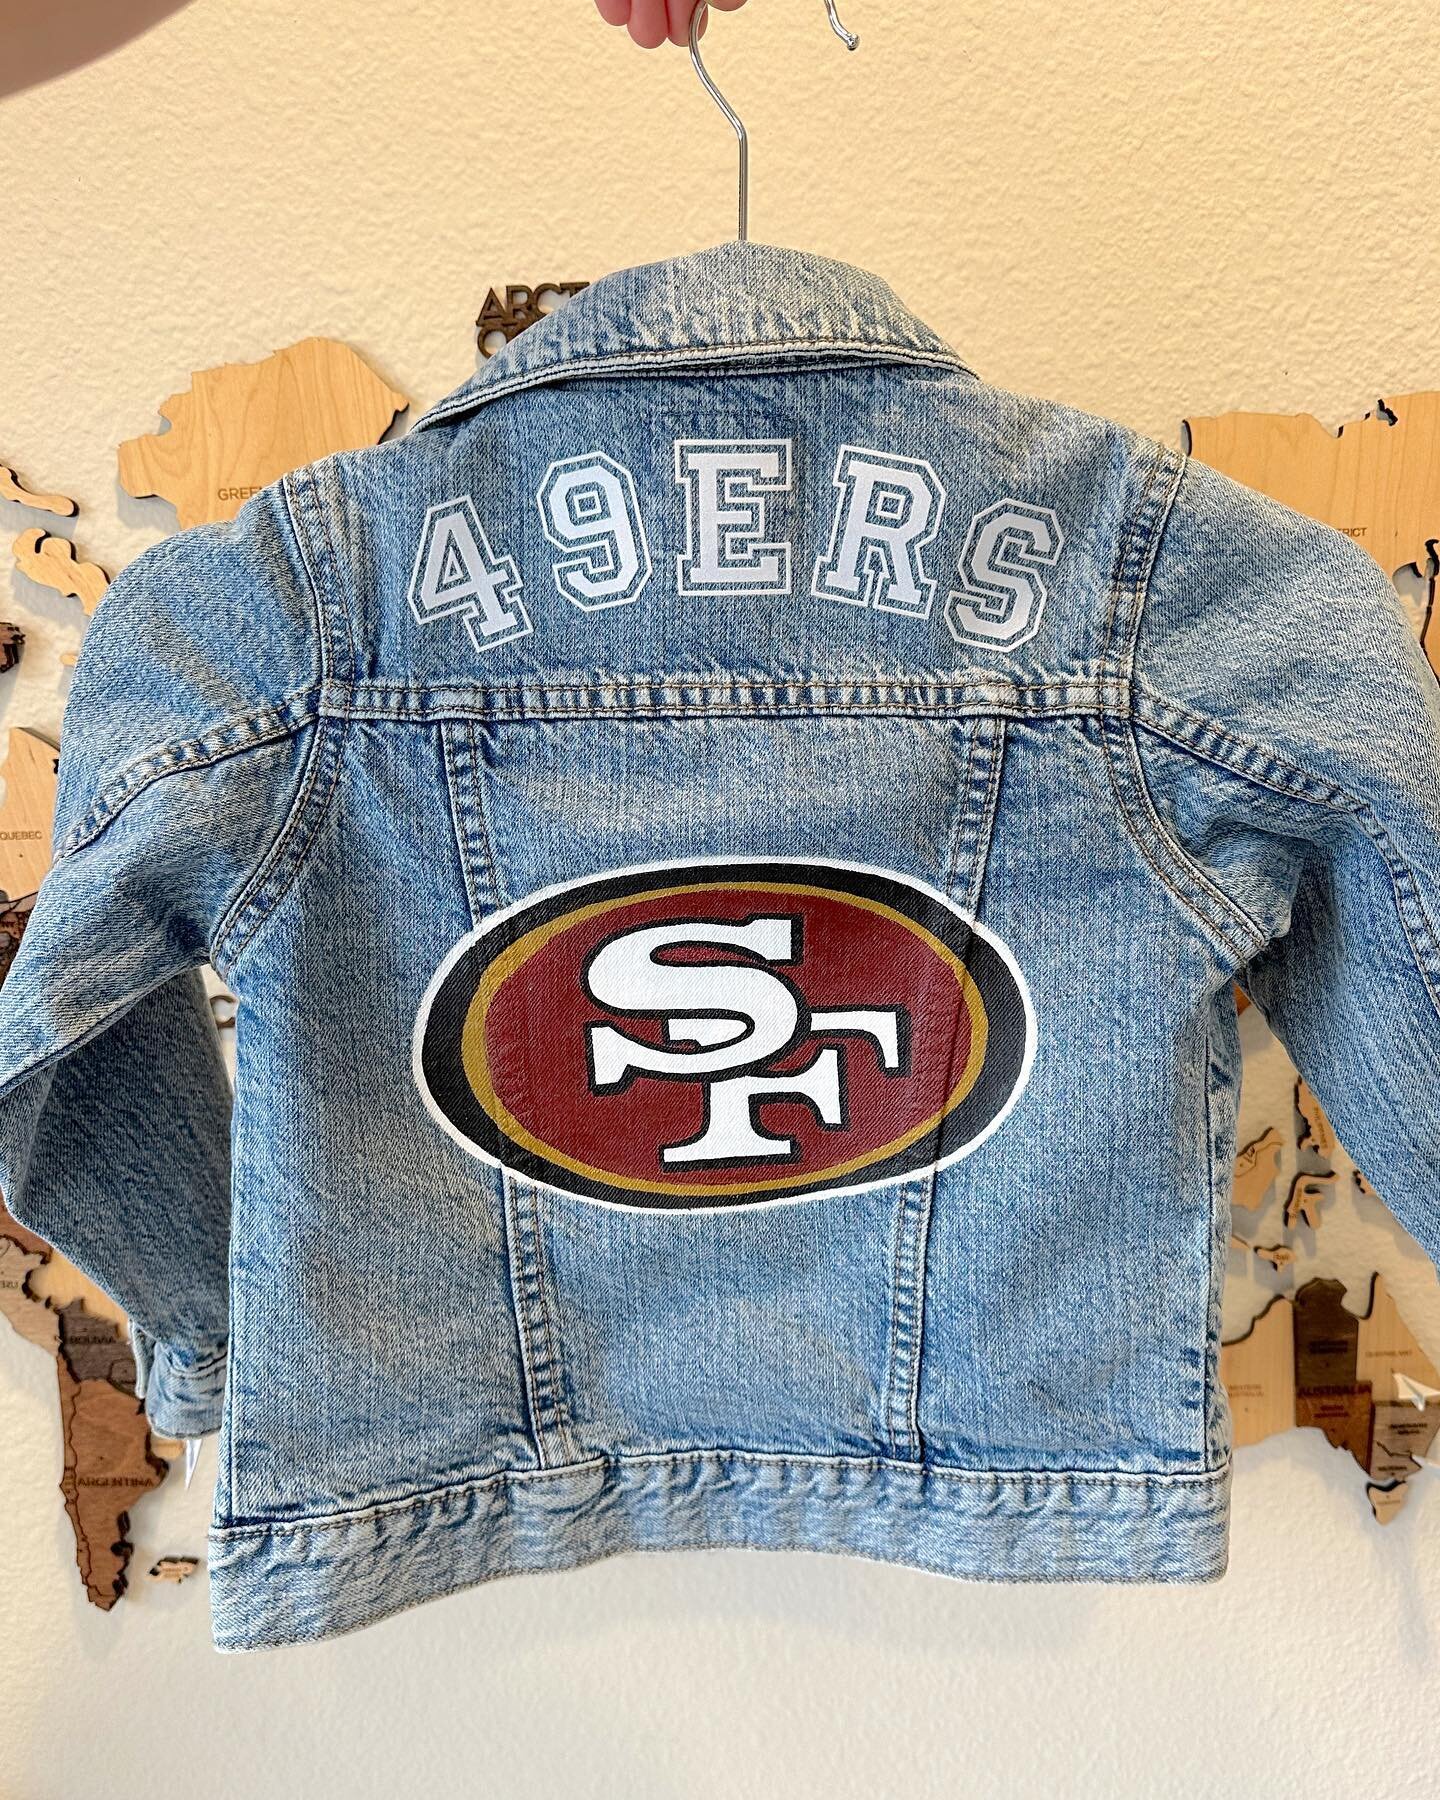 Made for a mini 49ers fan ❤️

I don&rsquo;t do custom orders &mdash; this was a gift for a friend&rsquo;s son 😊 The letters/numbers at the top are iron-on and so easy to use! I&rsquo;ll link them in stories for anyone who wants to try them out.

I h